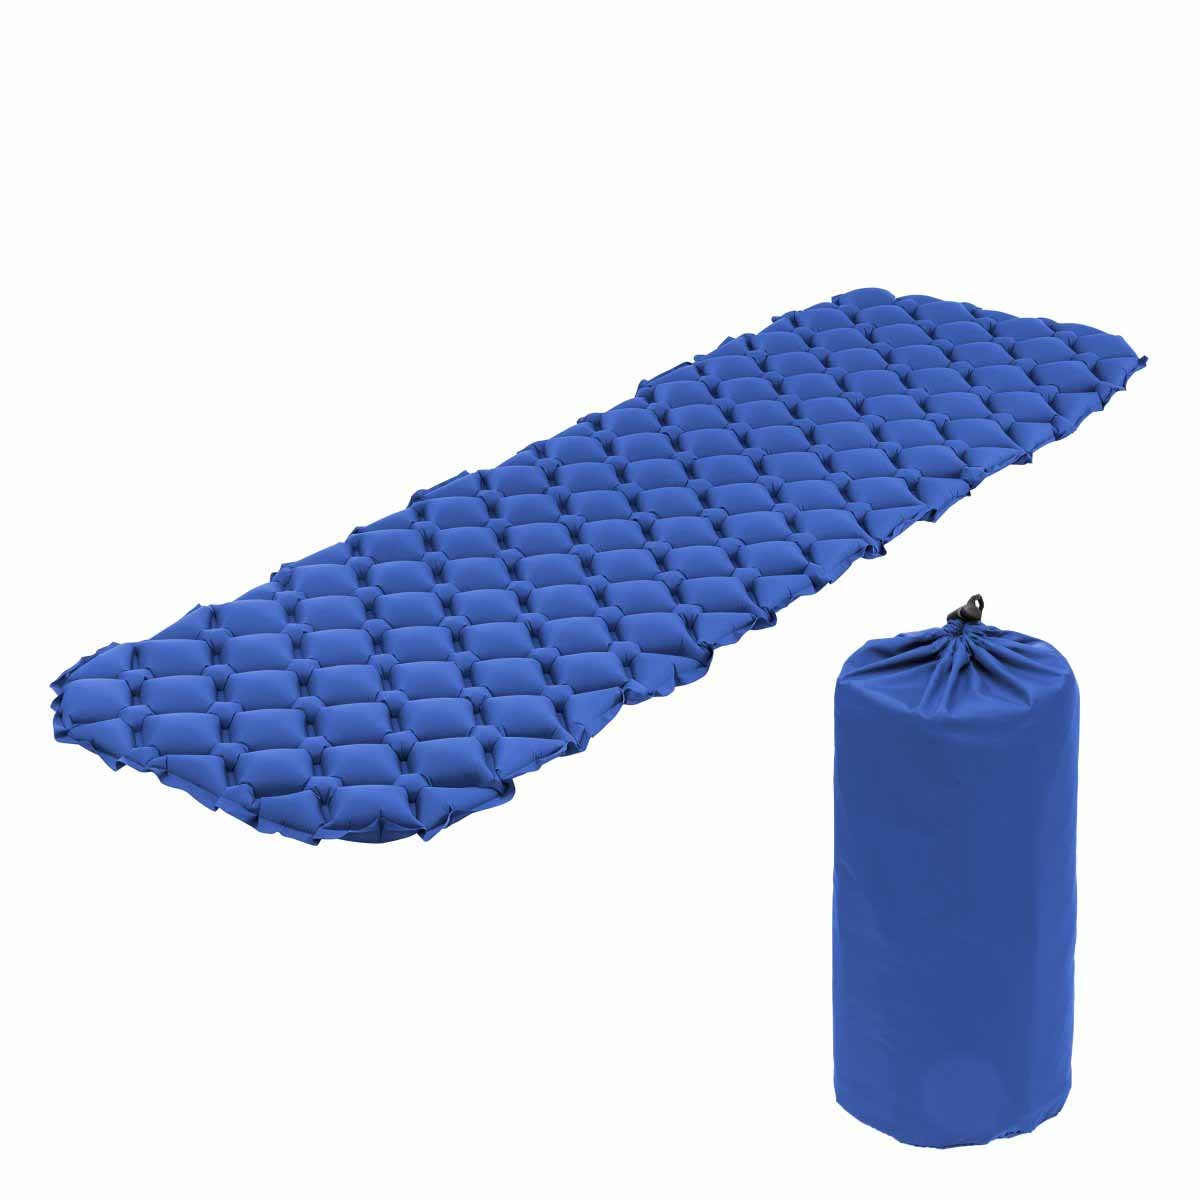 2-inch Waterproof Camping Self Inflating Sleeping Pad with Carry Bag, Blue